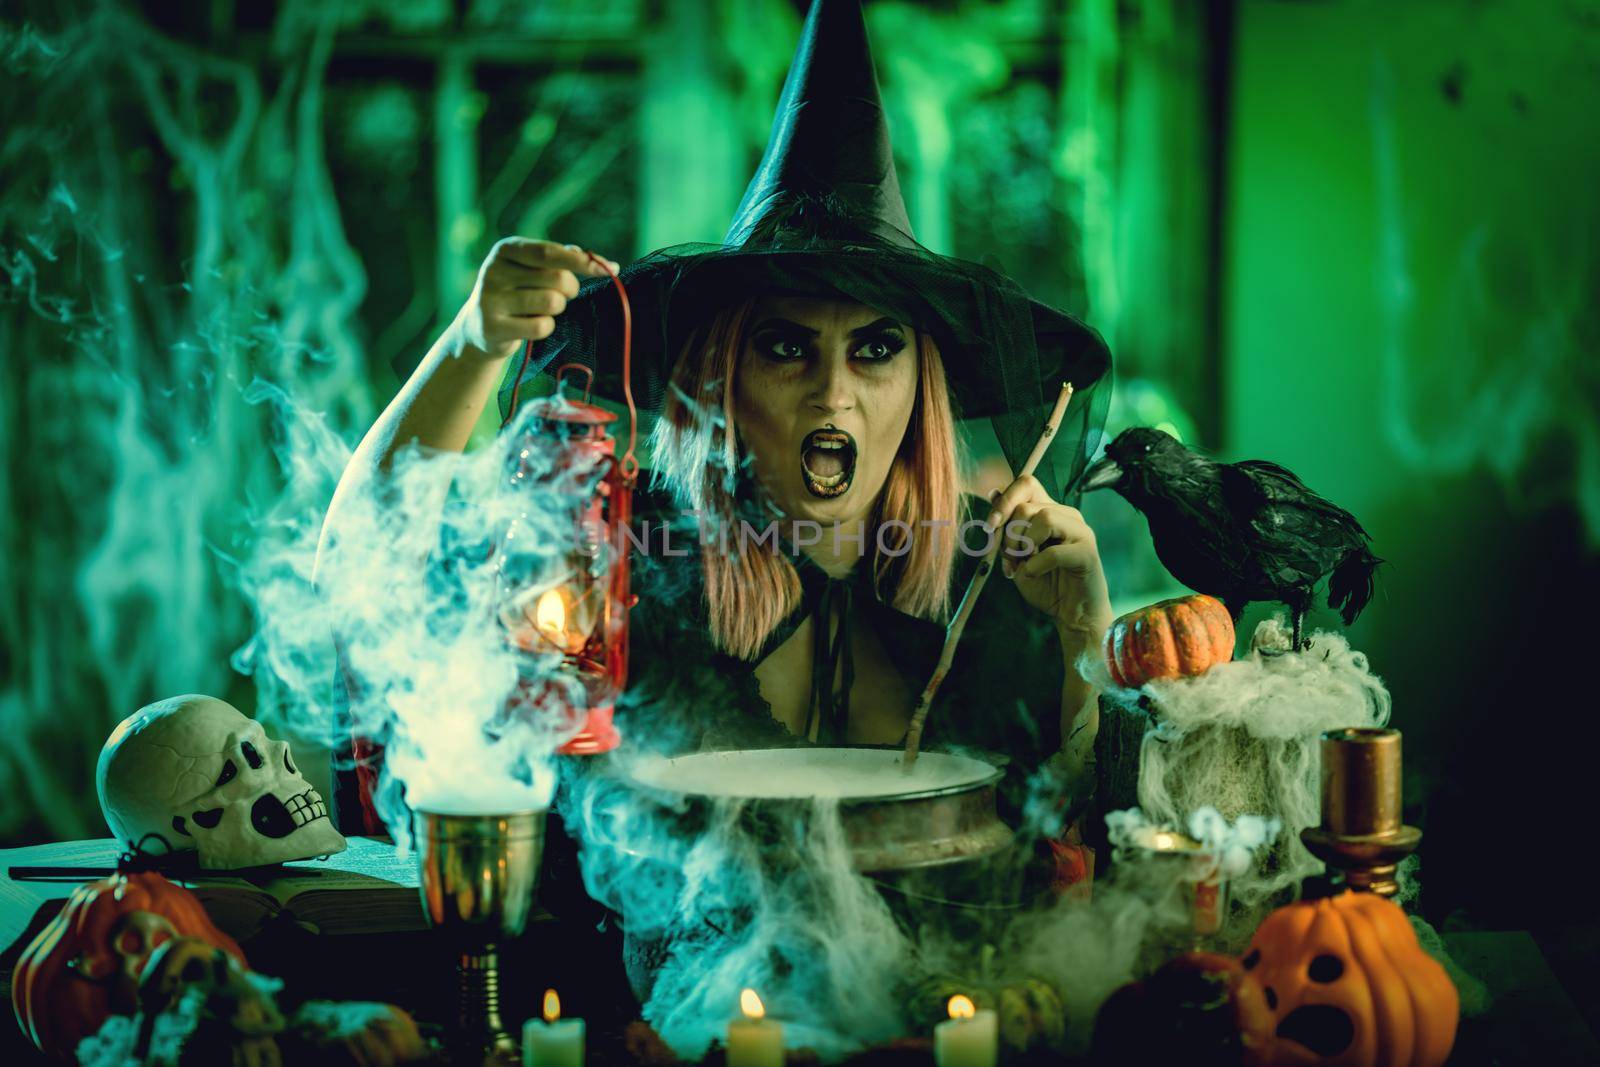 Witch with smiling face in creepy surroundings cooks poison soup in boiling cauldron.